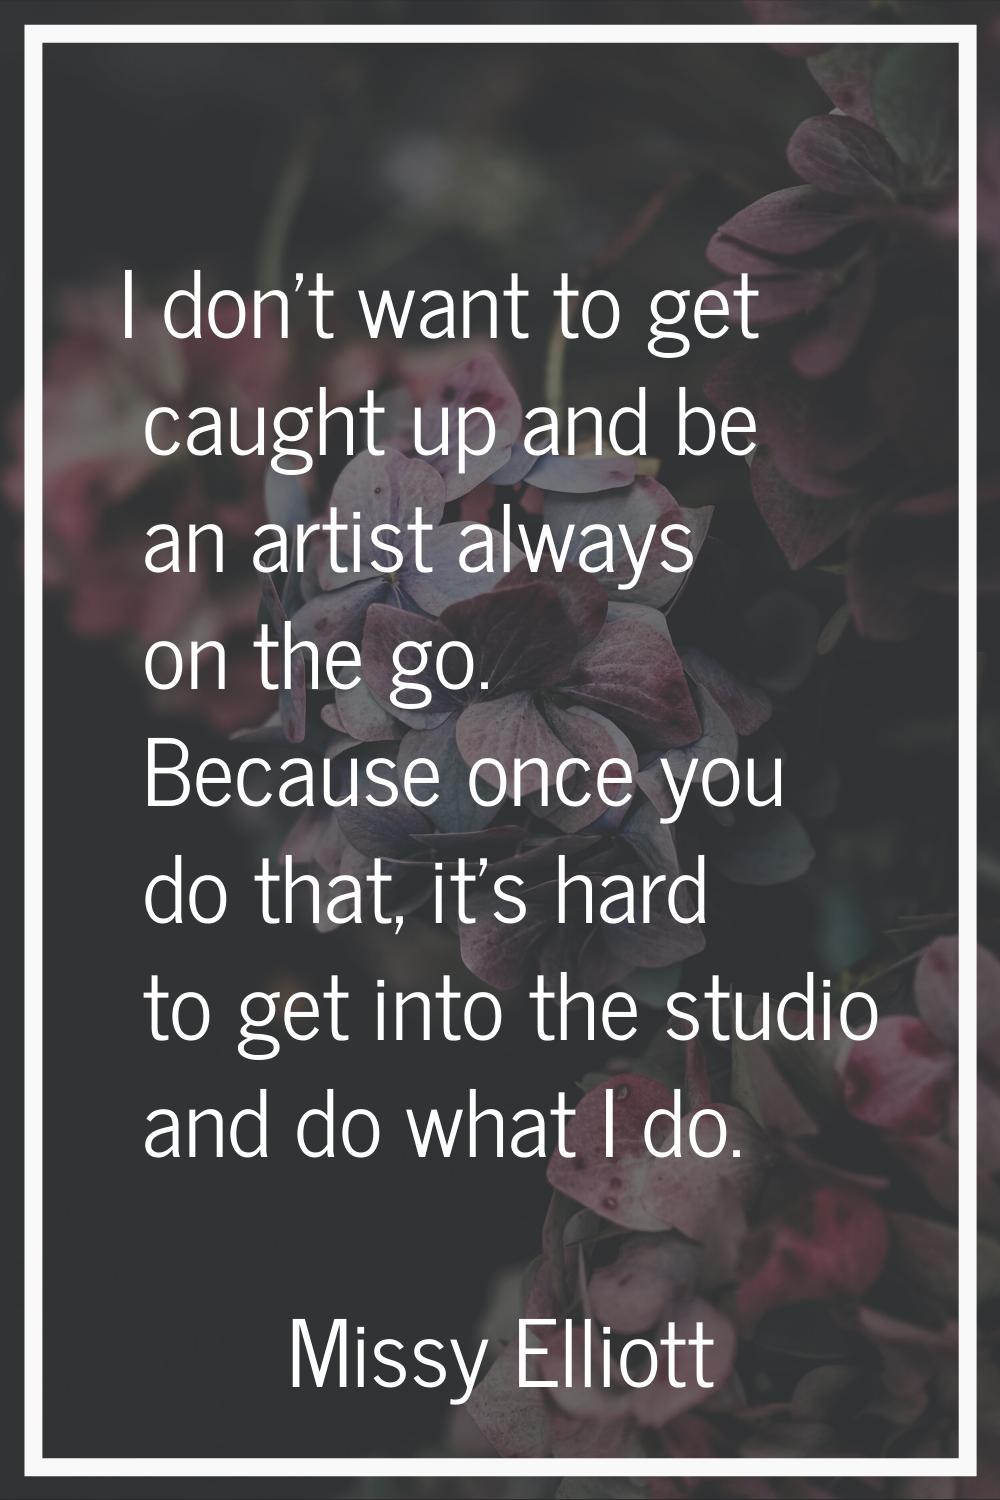 I don't want to get caught up and be an artist always on the go. Because once you do that, it's har